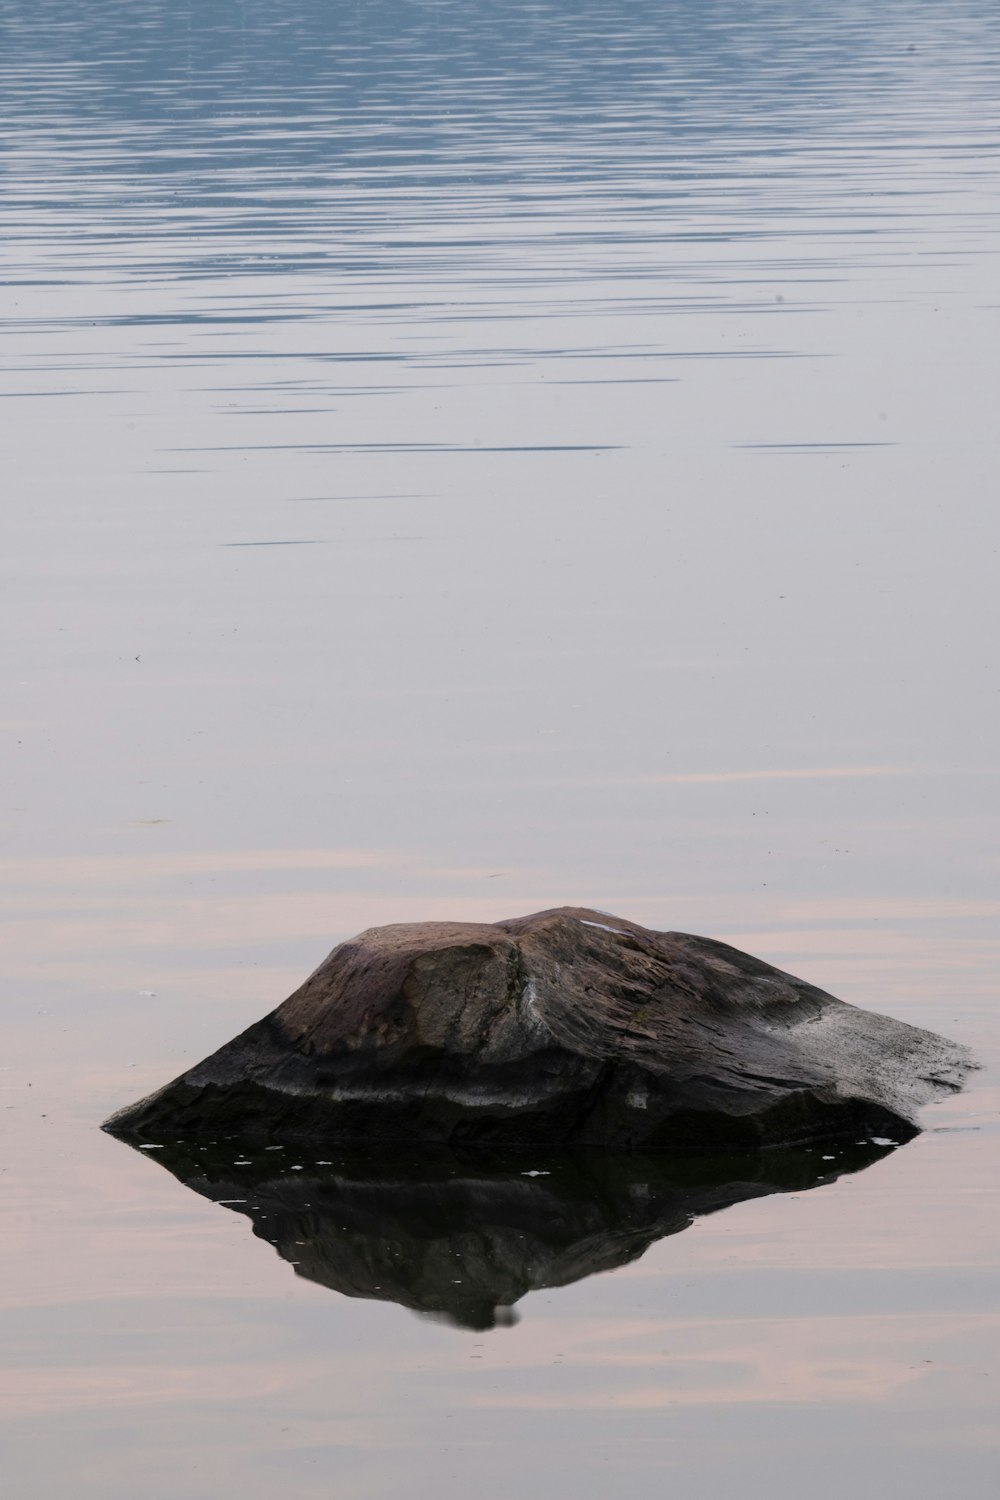 a rock in the middle of a body of water